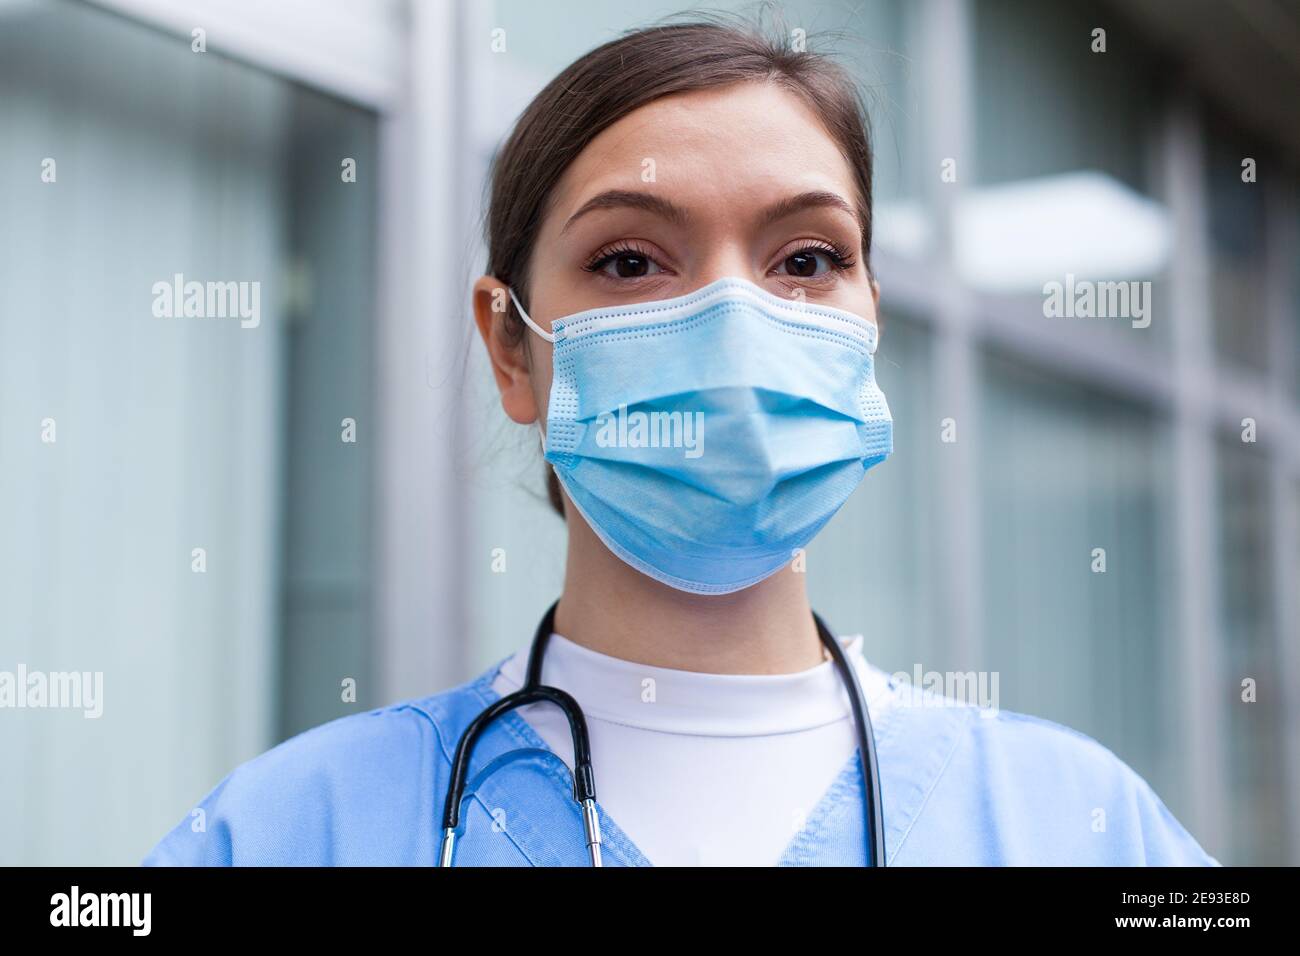 Closeup portrait of very tired exhausted UK NHS ICU doctor in front of hospital,Coronavirus COVID-19 pandemic outbreak crisis,sleep deprived EMS medic Stock Photo